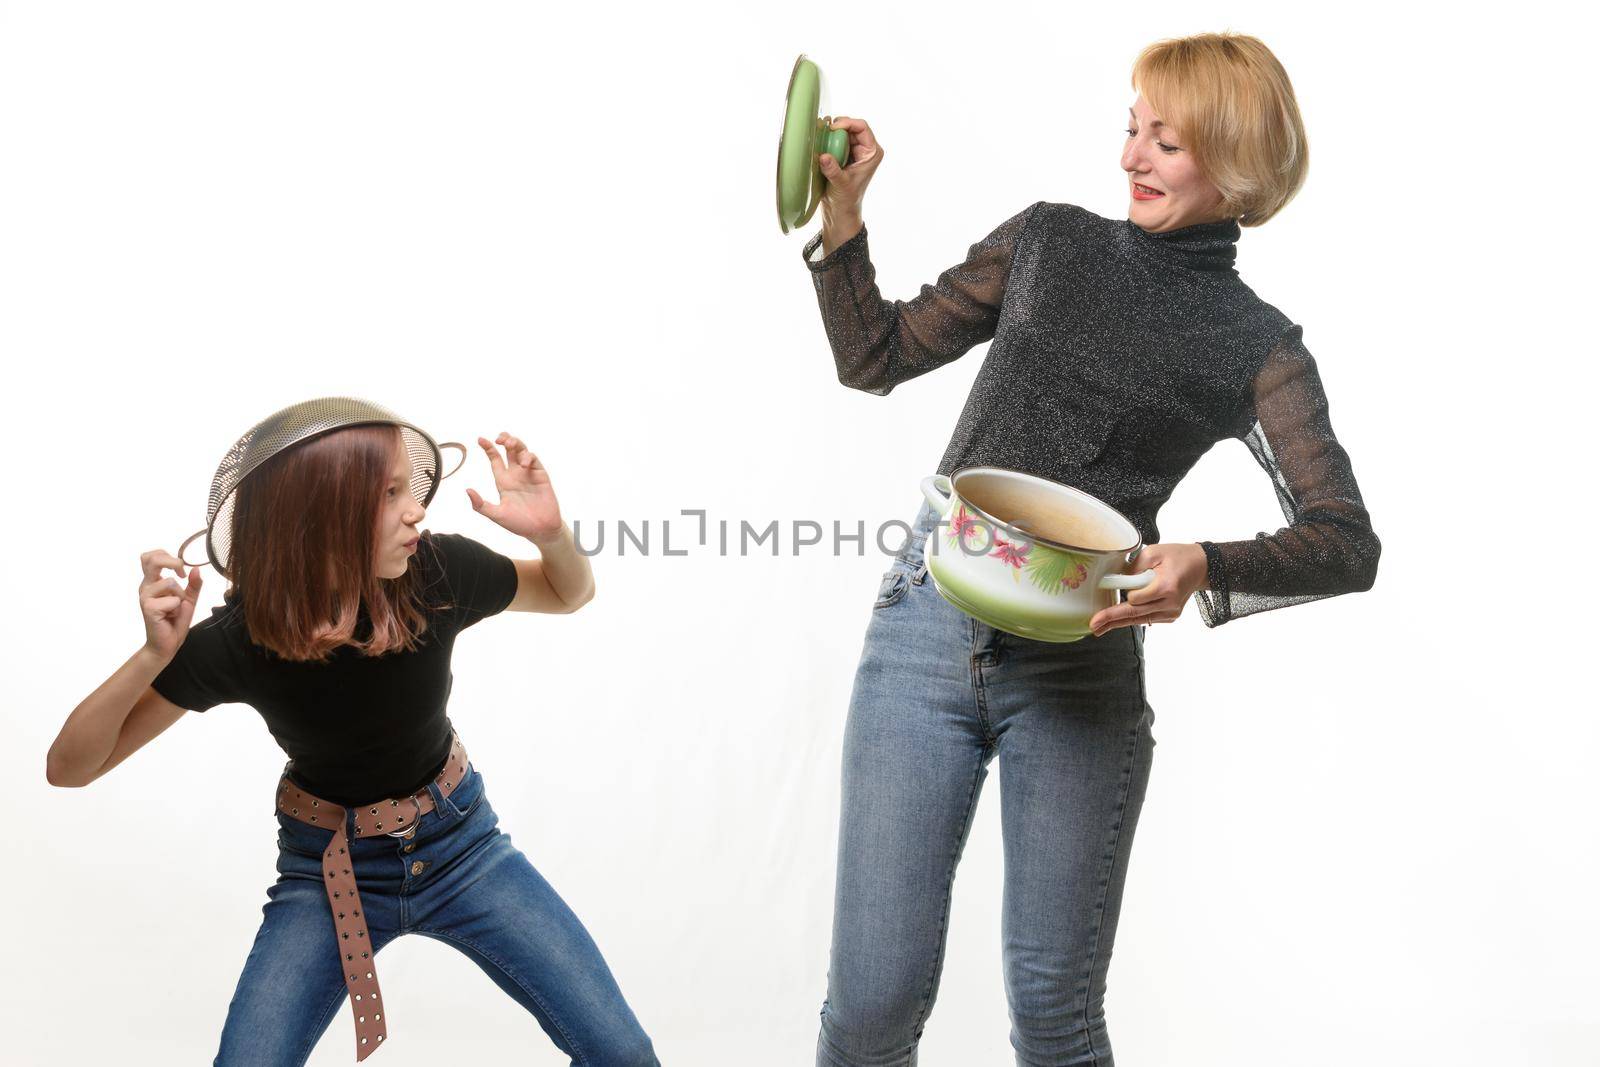 Mom and daughter have fun using kitchen utensils by Madhourse